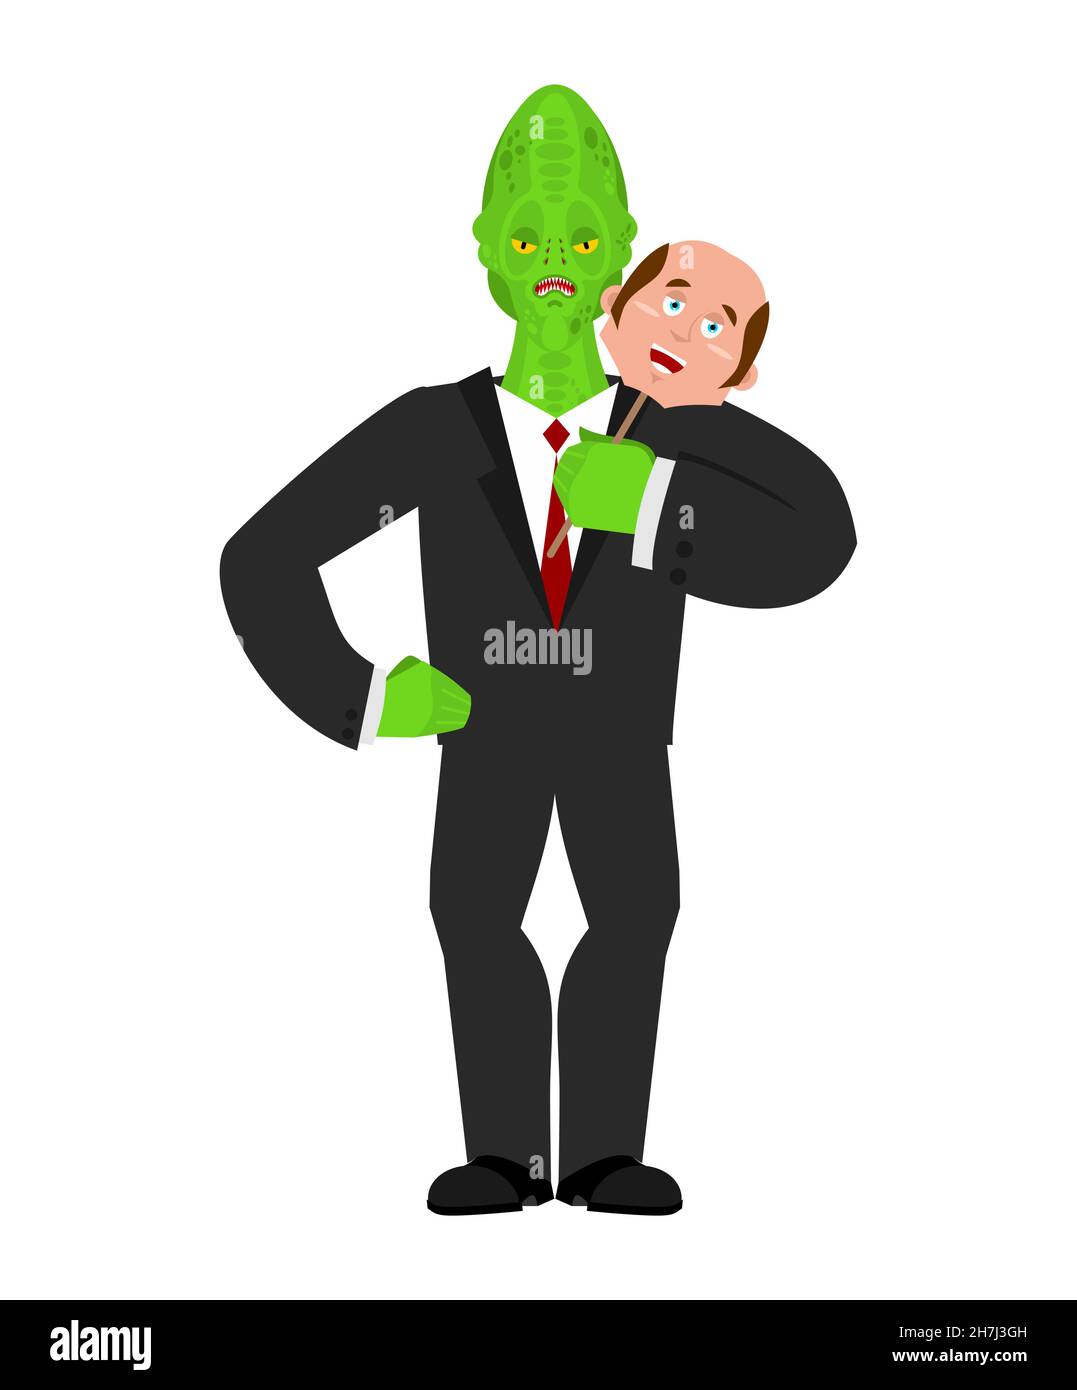 Reptilian disguised as human. Alien land invaders. Reptilian conspiracy theory. reptiloid humanoid beings from another planet with green skin. theory Stock Vector